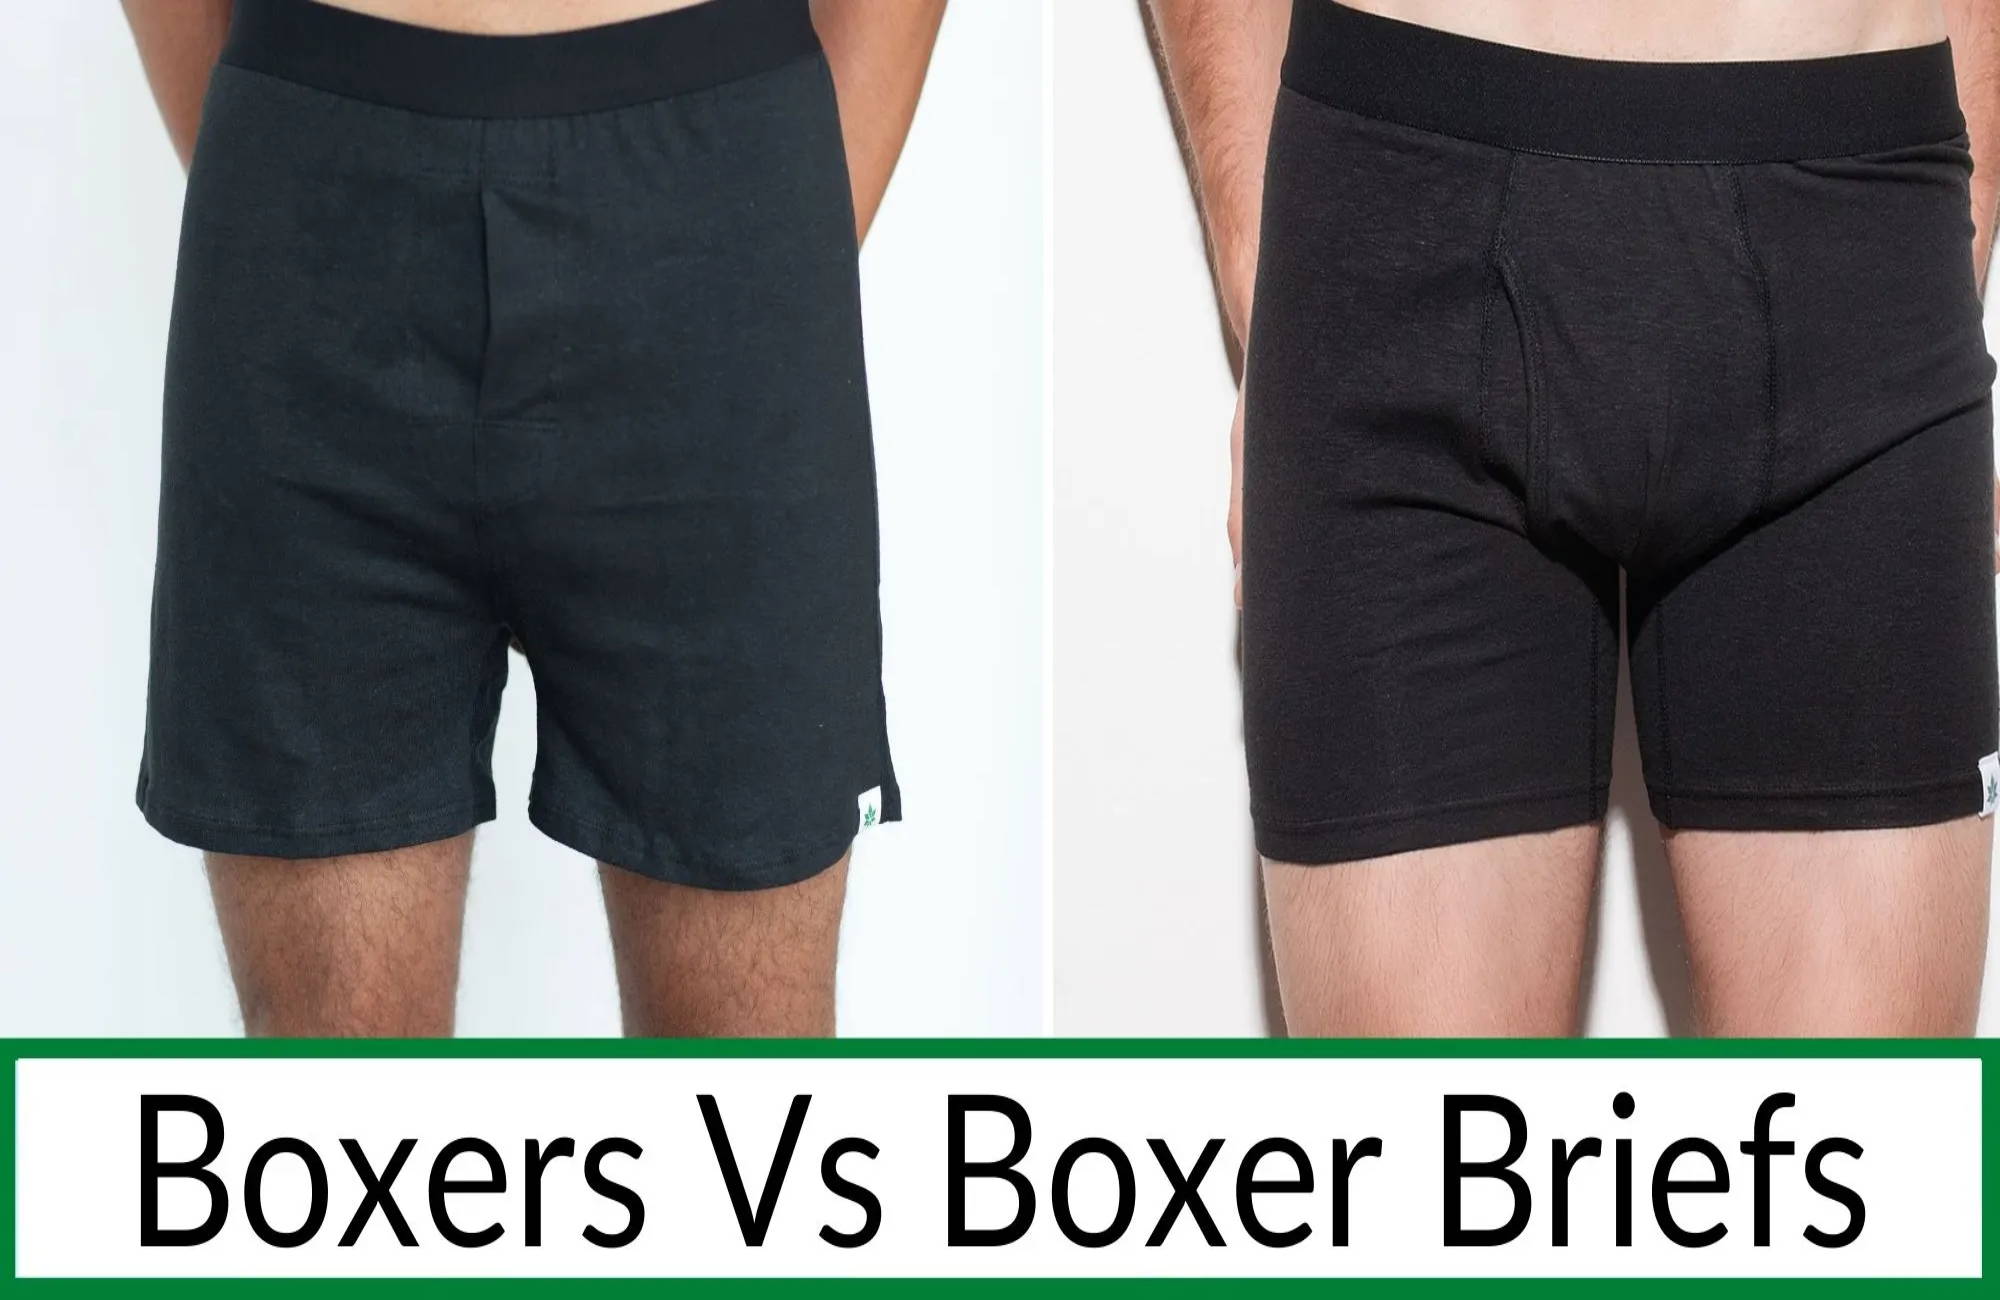 Two men stand wearing boxers vs boxer briefs in black hemp material